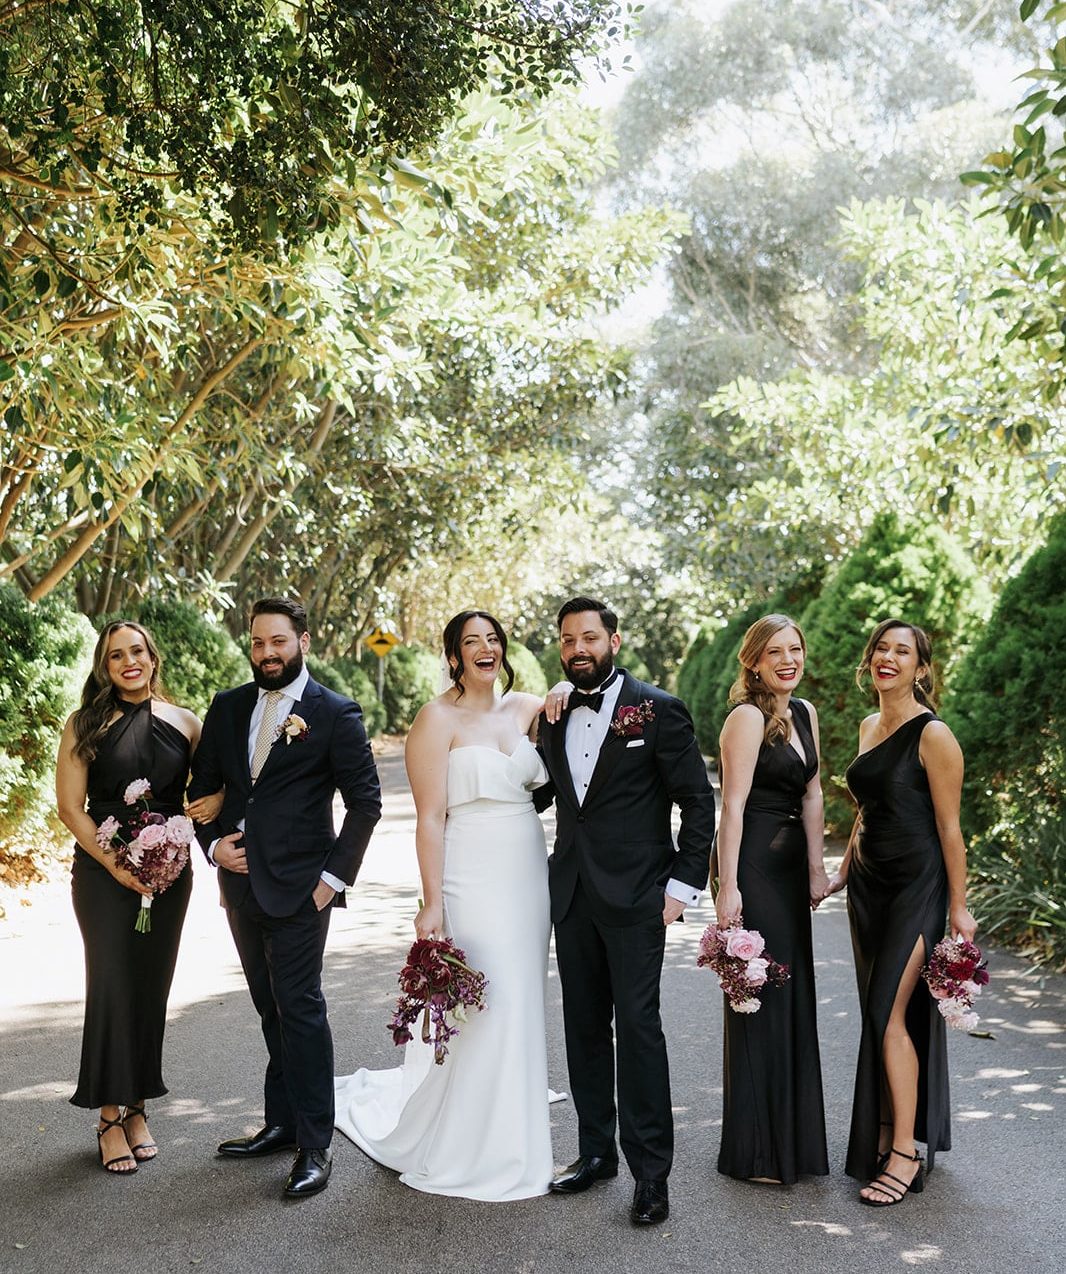 Classic-Black-and-White-Wedding-Party-Aesthetic-at-Melbourne-Wedding-Photographed-by-Art-of-Grace